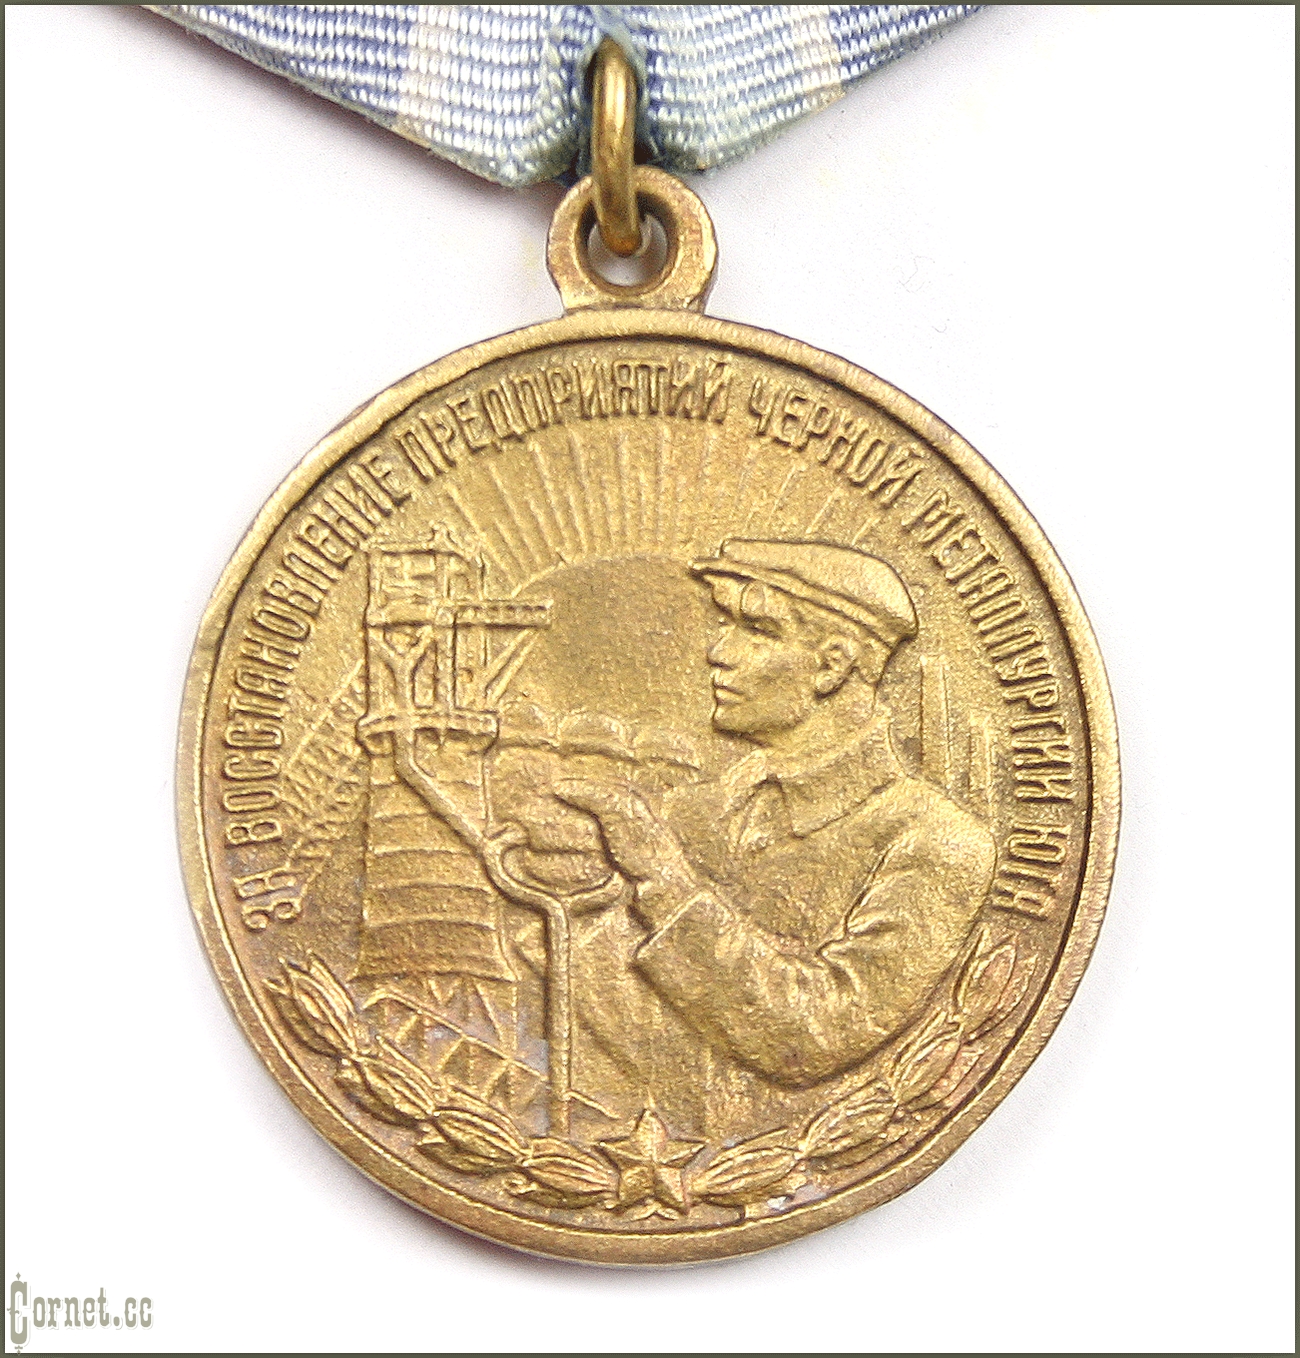 Medal "For Reconstruction of Steel Industry Enterprises of the South."